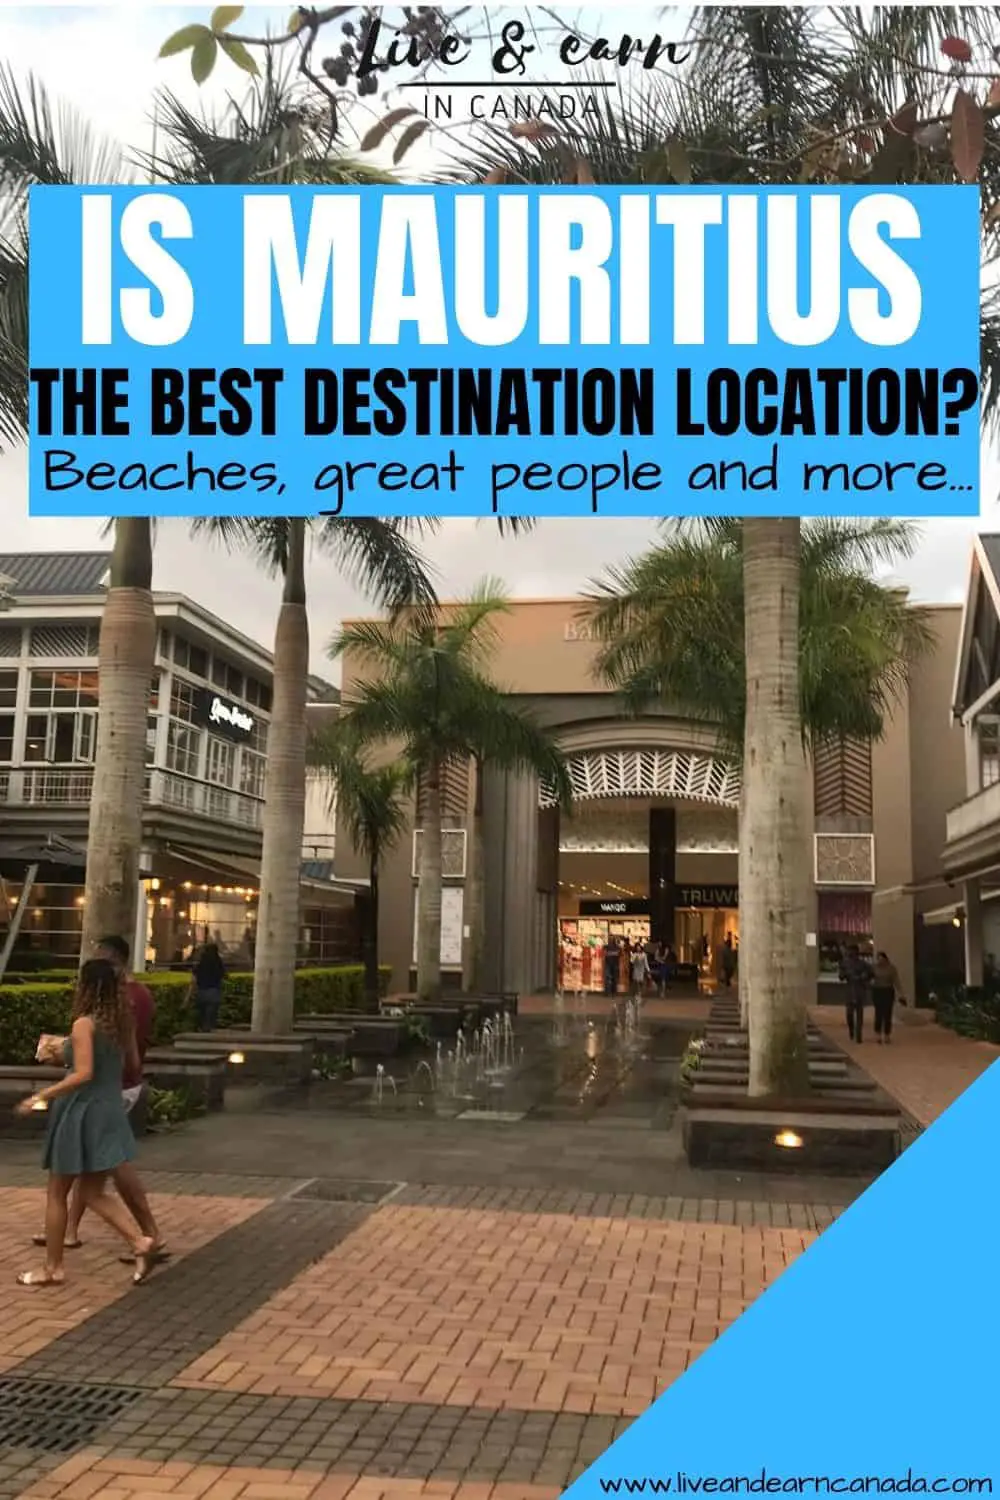 Thinking of visiting Mauritius? Here are 7 amazing reasons why you should consider visiting Mauritius this year. Plan your best trip to Mauritius right now. Learn the best time and all the travel tips you need to visit Mauritius #mauritiusisland #africa #mauritiustravel #islanddestination #mauritius